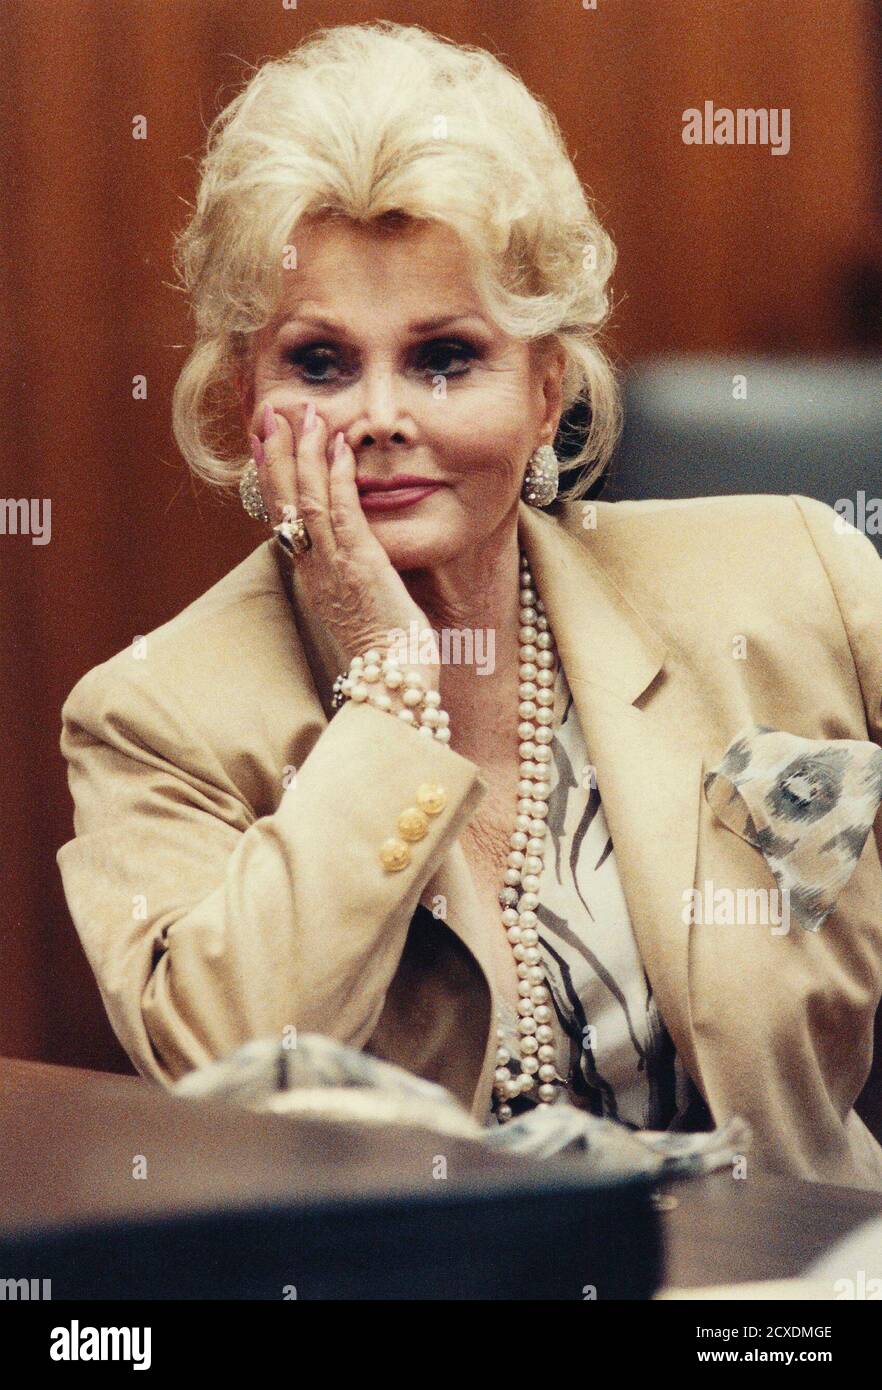 Zsa Zsa listens in court in Beverly Hills, as she is to over 145 hours of community service after a judge ruled she failed complete her prior community service